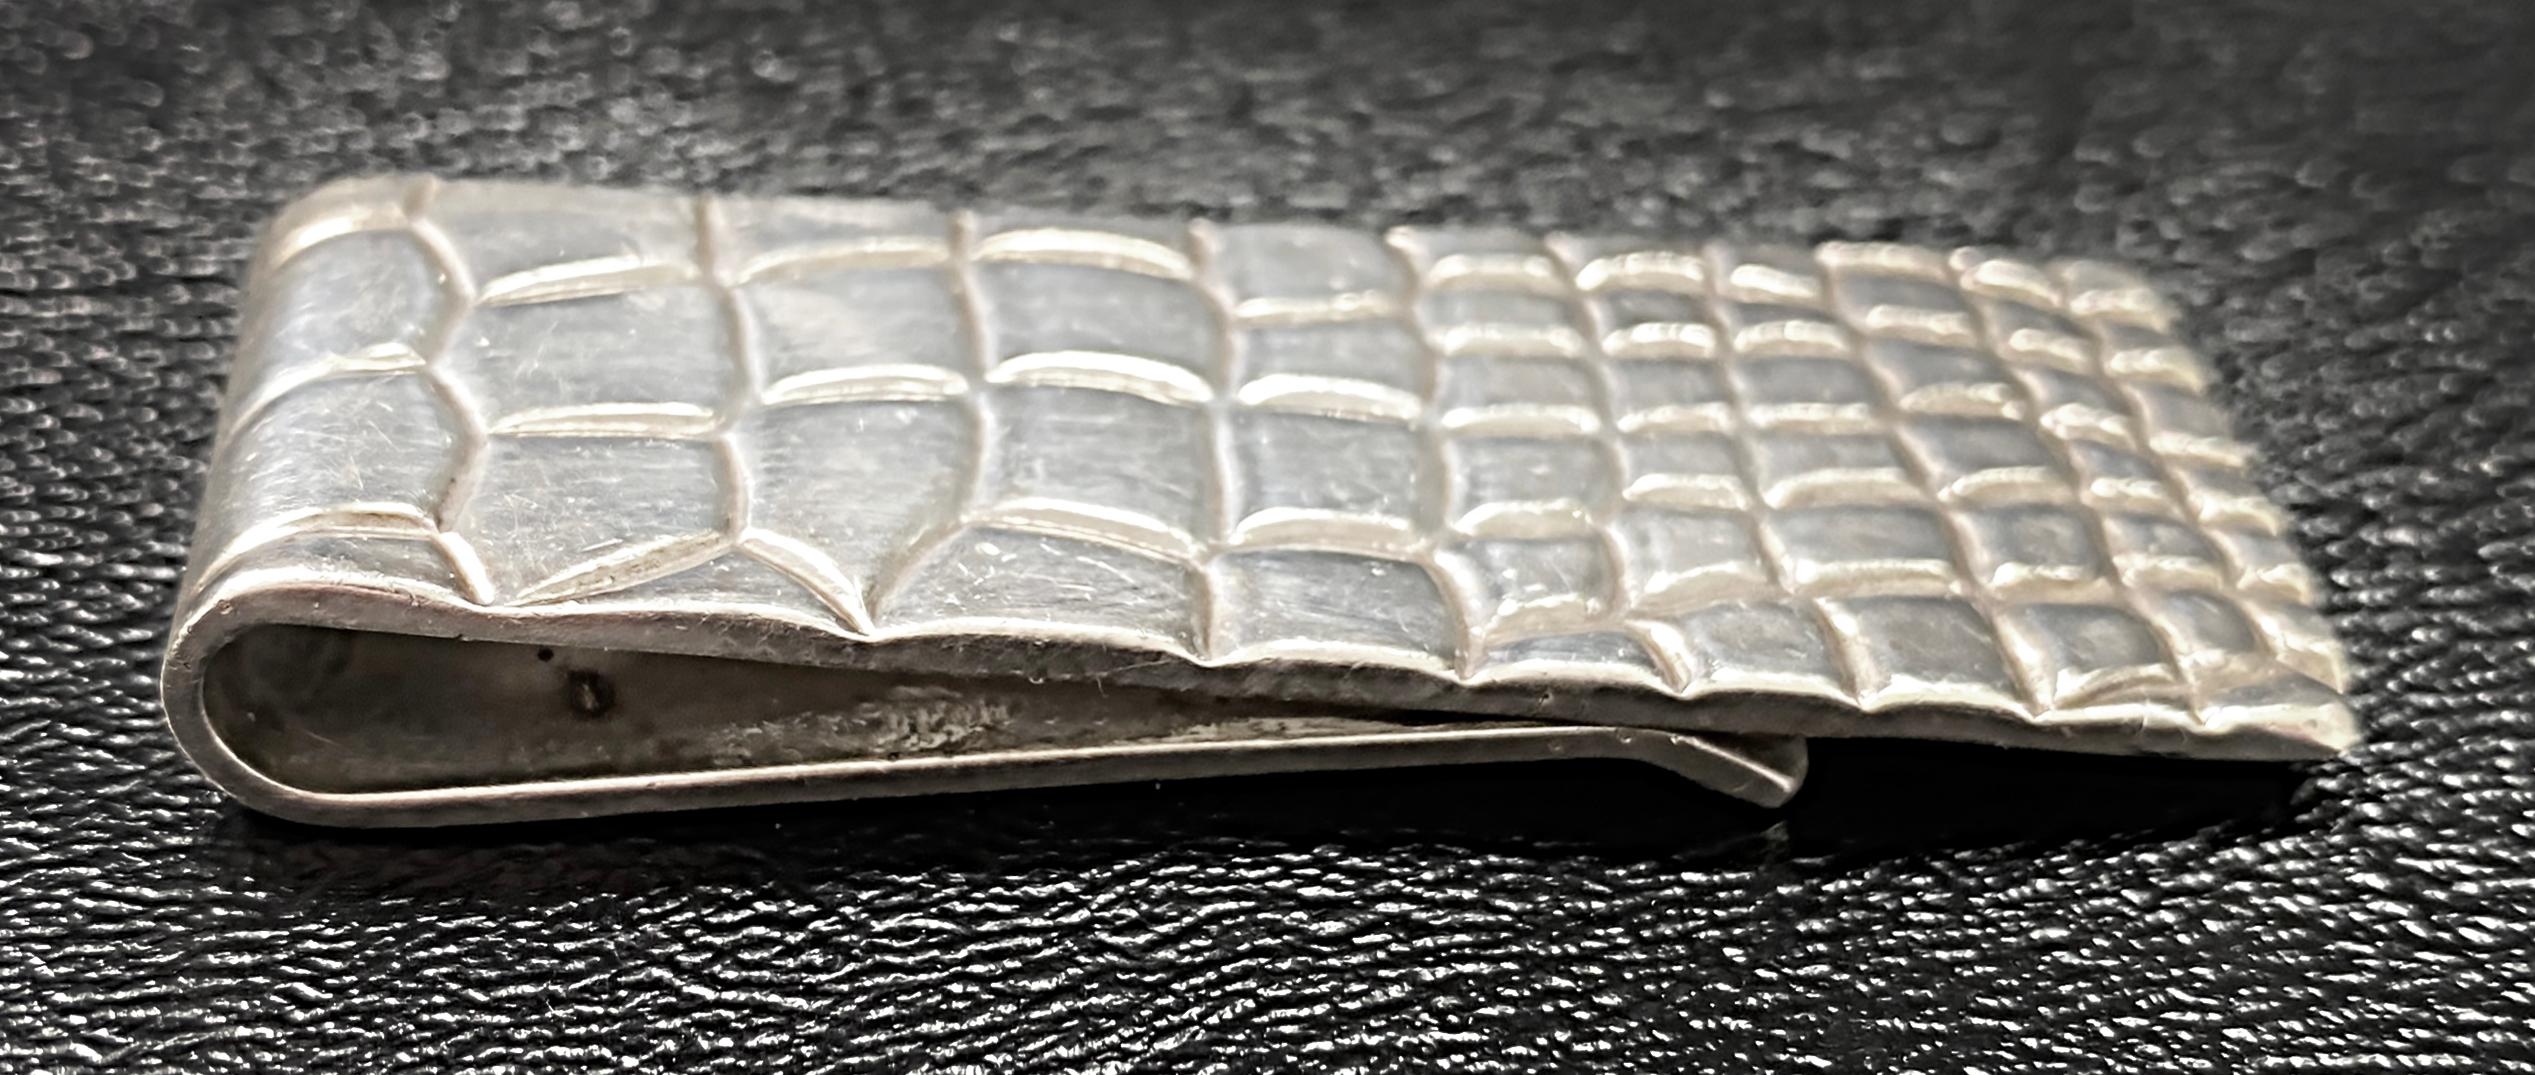 Sterling Silver Tiffany & Co. Faux Crocodile Money Clip, 1950s

Offered for sale is a rare and highly sought-after gentleman's alligator crocodile pattern sterling silver Tiffany Studios money clip dating from the 1950s.